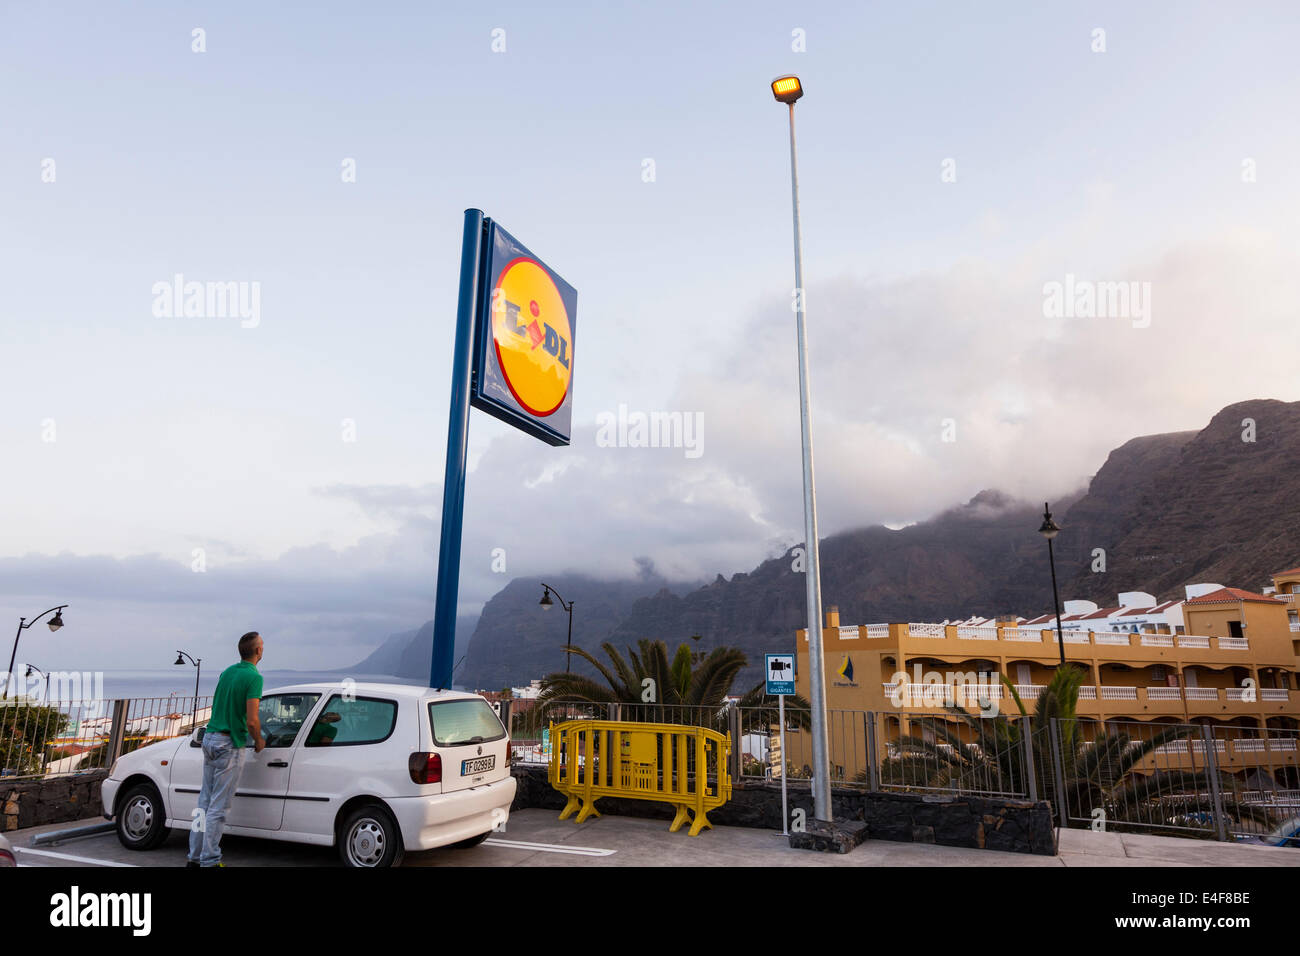 Car park and Lidl supermarket sign in Puerto santiago overlooking the Los  Gigantes cliffs, Tenerife, Canary Islands, Spain Stock Photo - Alamy